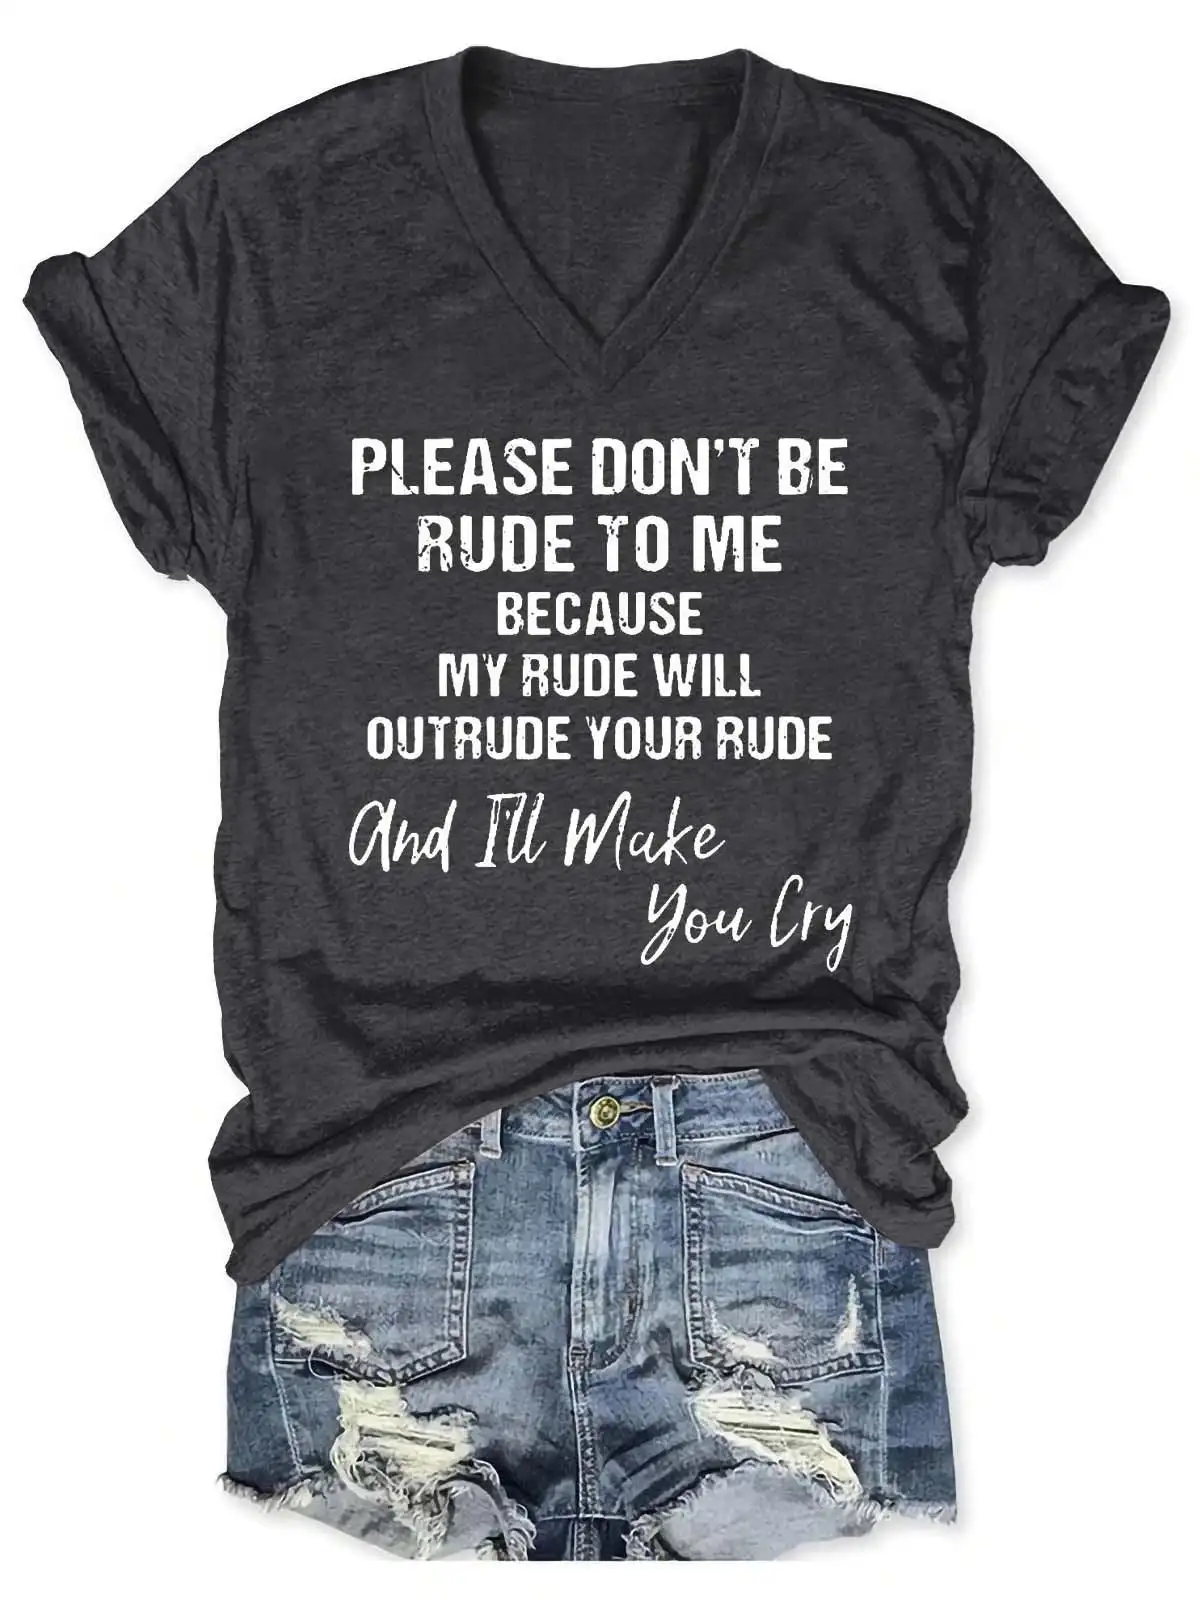 Please Don't Be Rude To Me Because My Rude Will Outrude Your Rude And I'll Make You Cry V-Neck Short Sleeve 100% Cotton